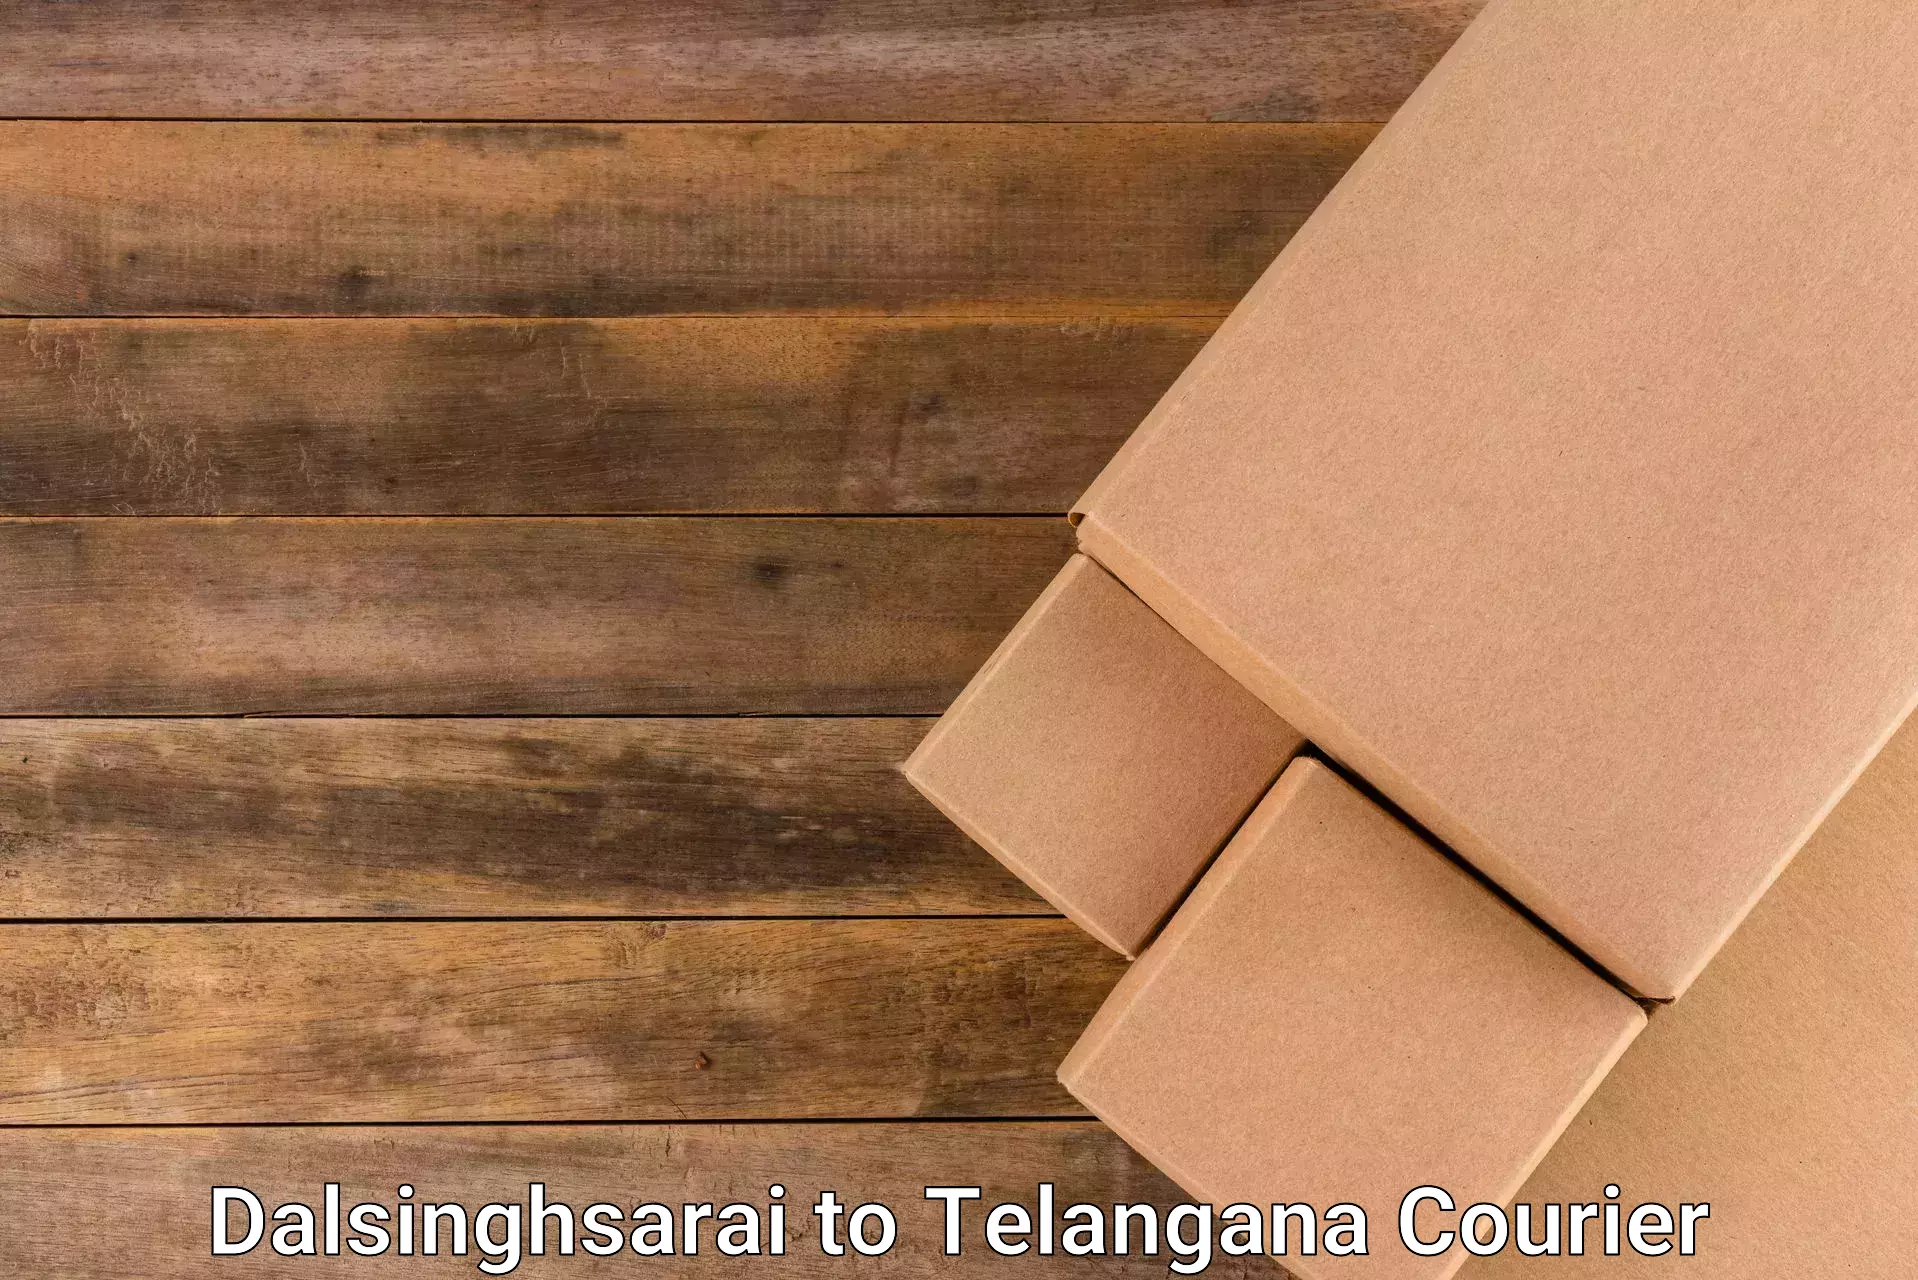 Trackable shipping service in Dalsinghsarai to Telangana